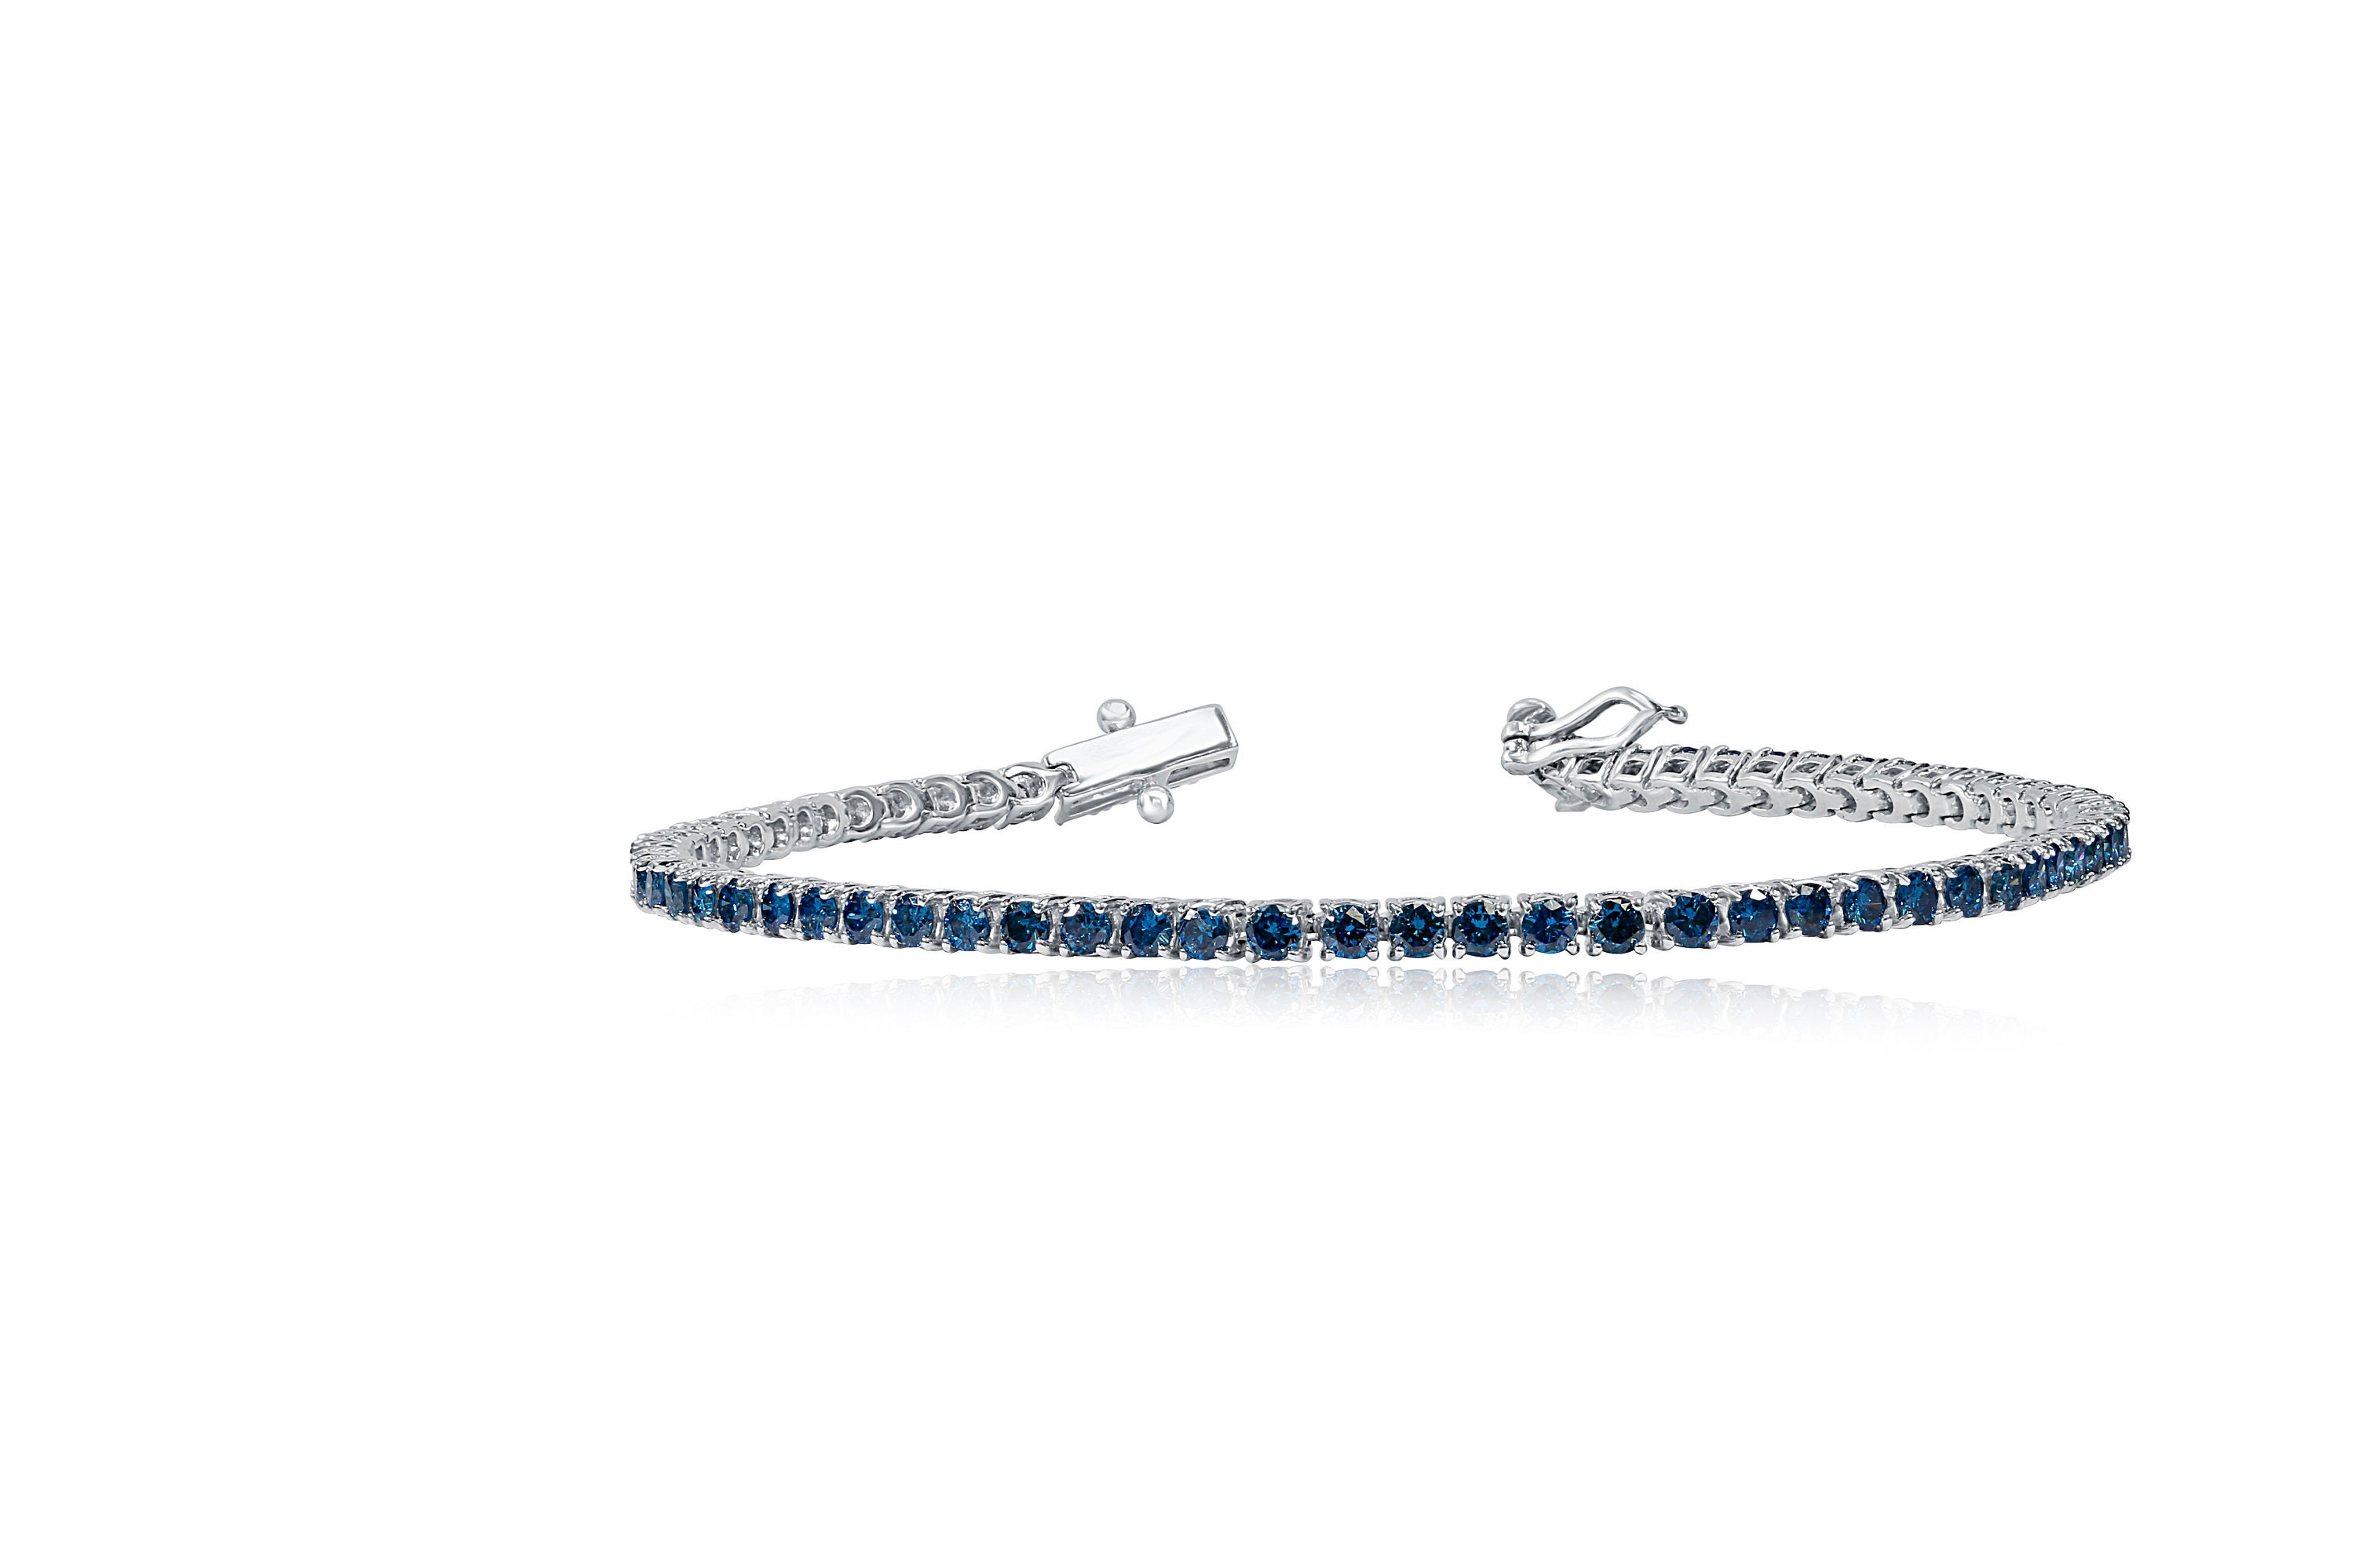 Buy Steorra jewels ❣ Presents this Golden Base Blue American Diamond Bangle  Set Size 24 that is put together in a tasteful design to adorn your lovely  Bangle at Amazon.in